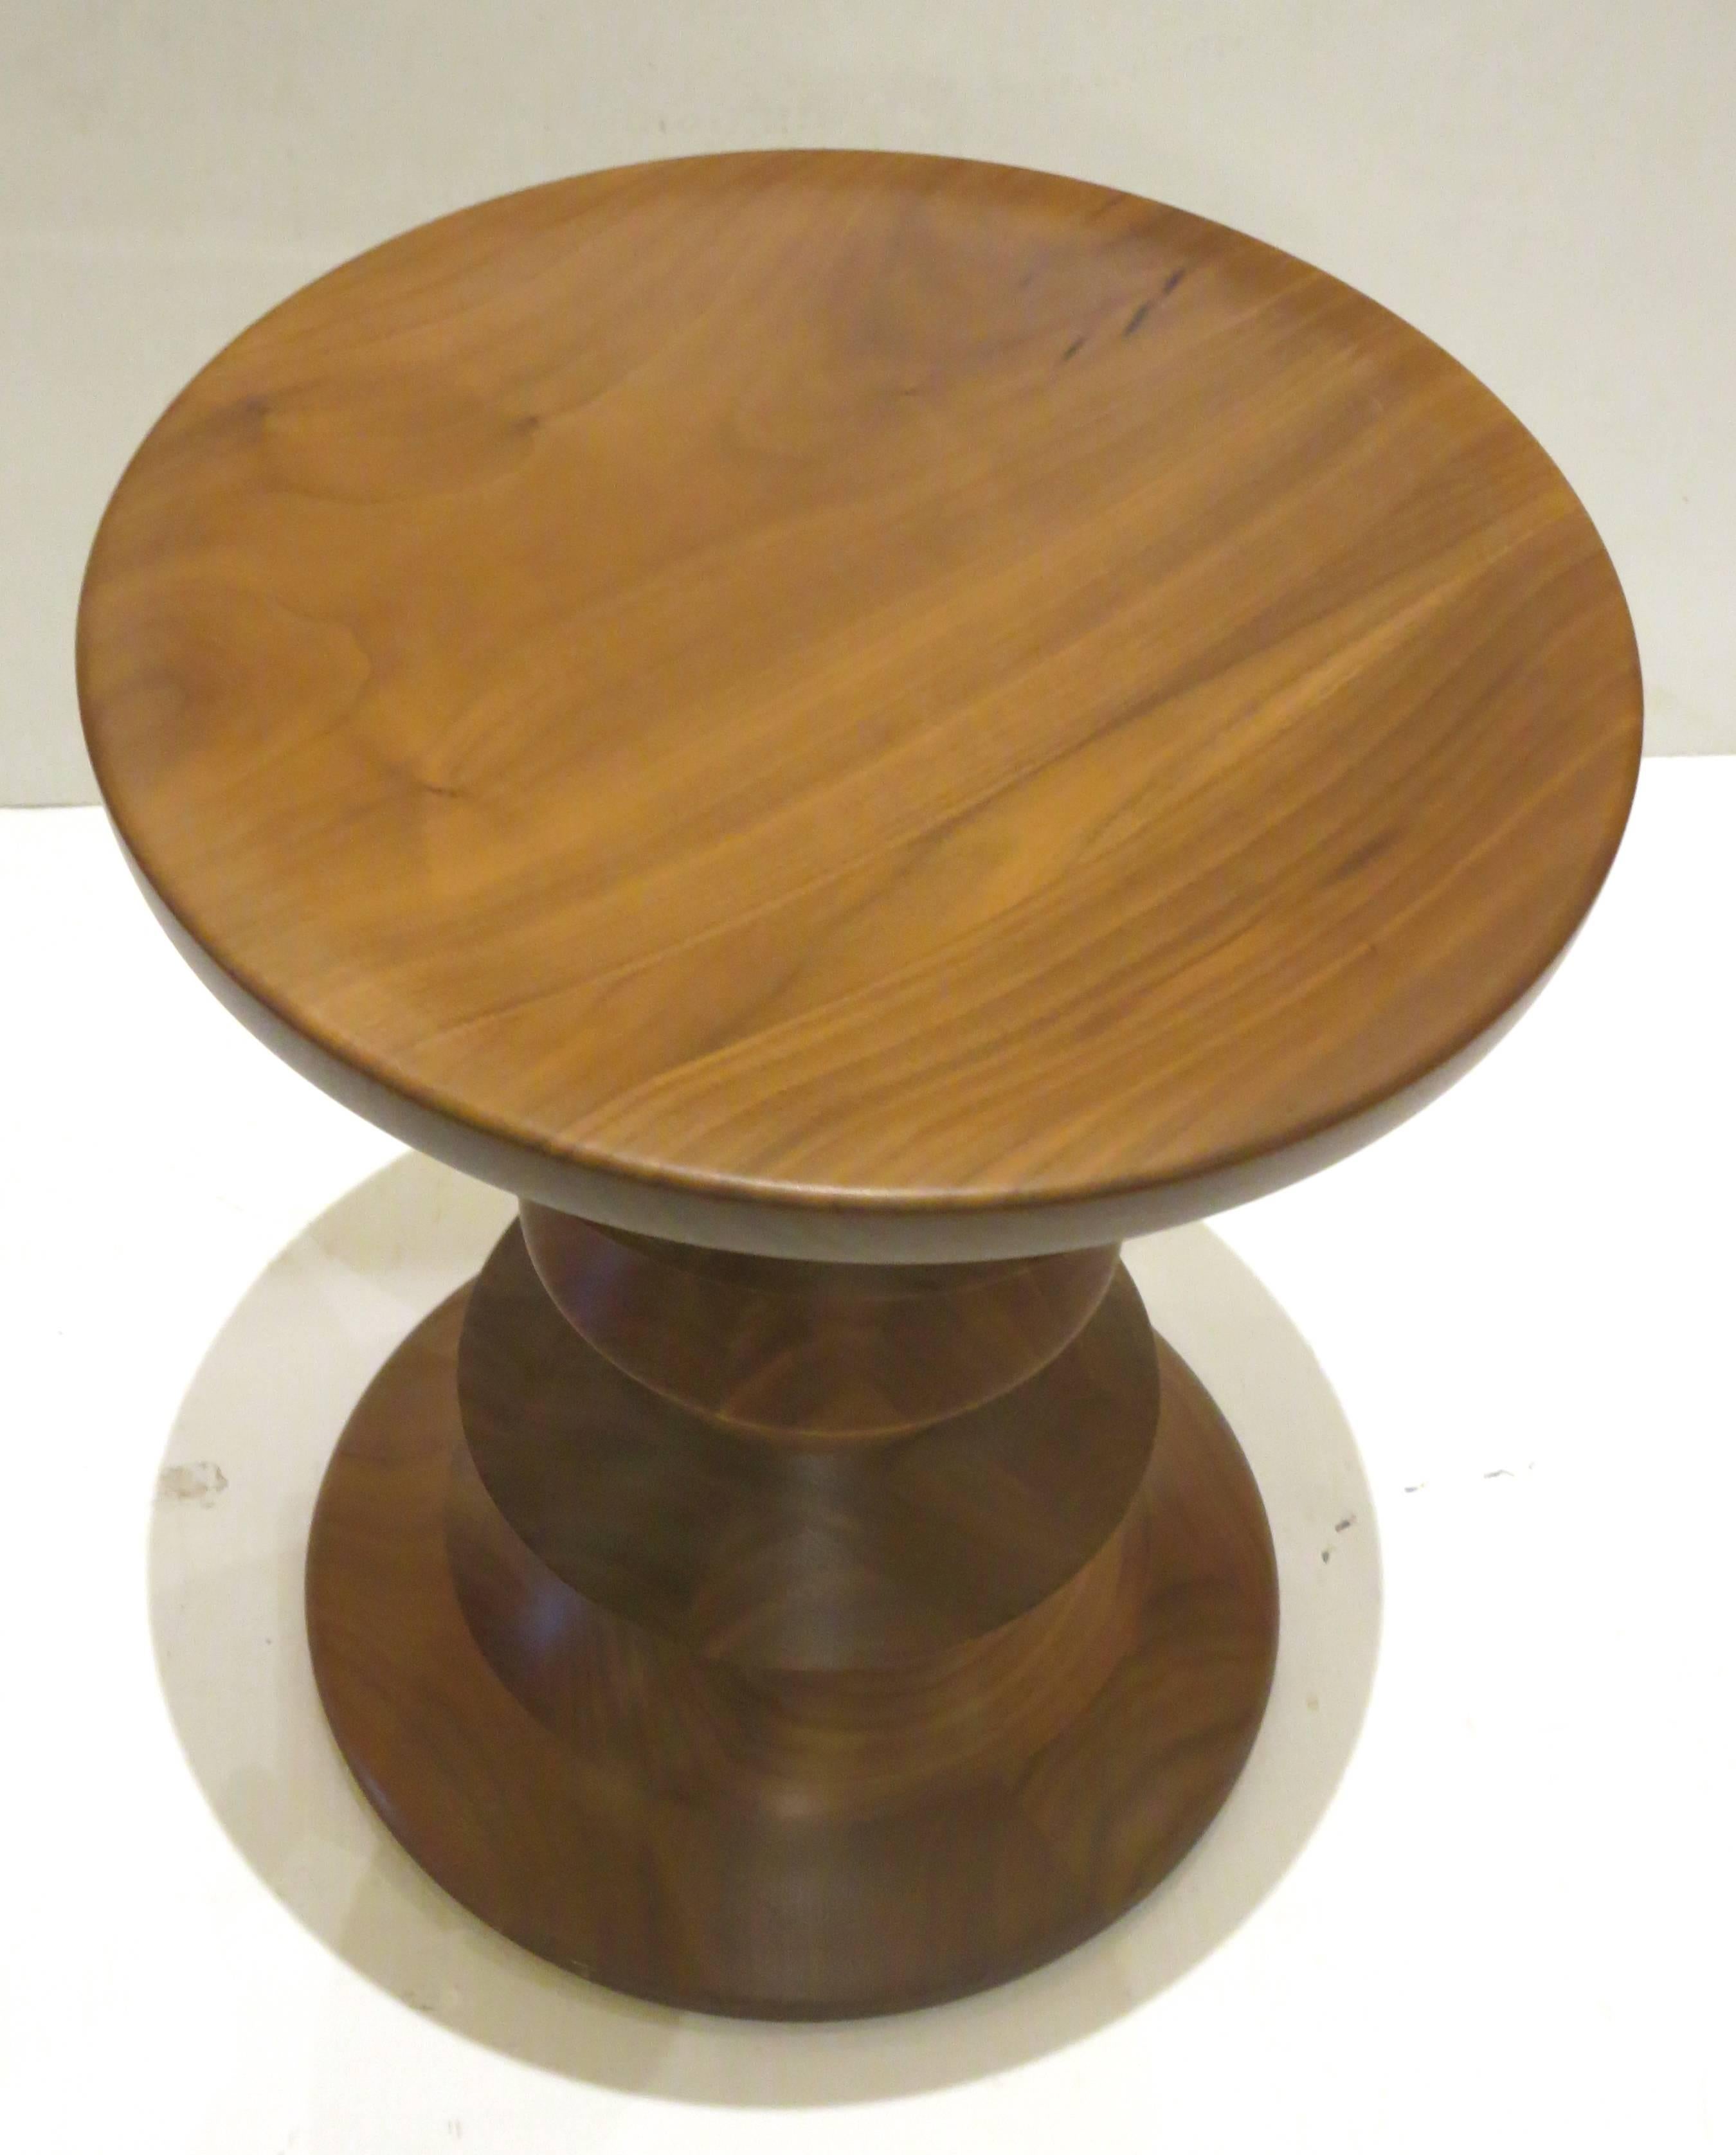 Nice great looking solid walnut stool, designed by Charles and Ray Eames in 1960s, this one its from the late 1980s, great condition original finish very light wear.